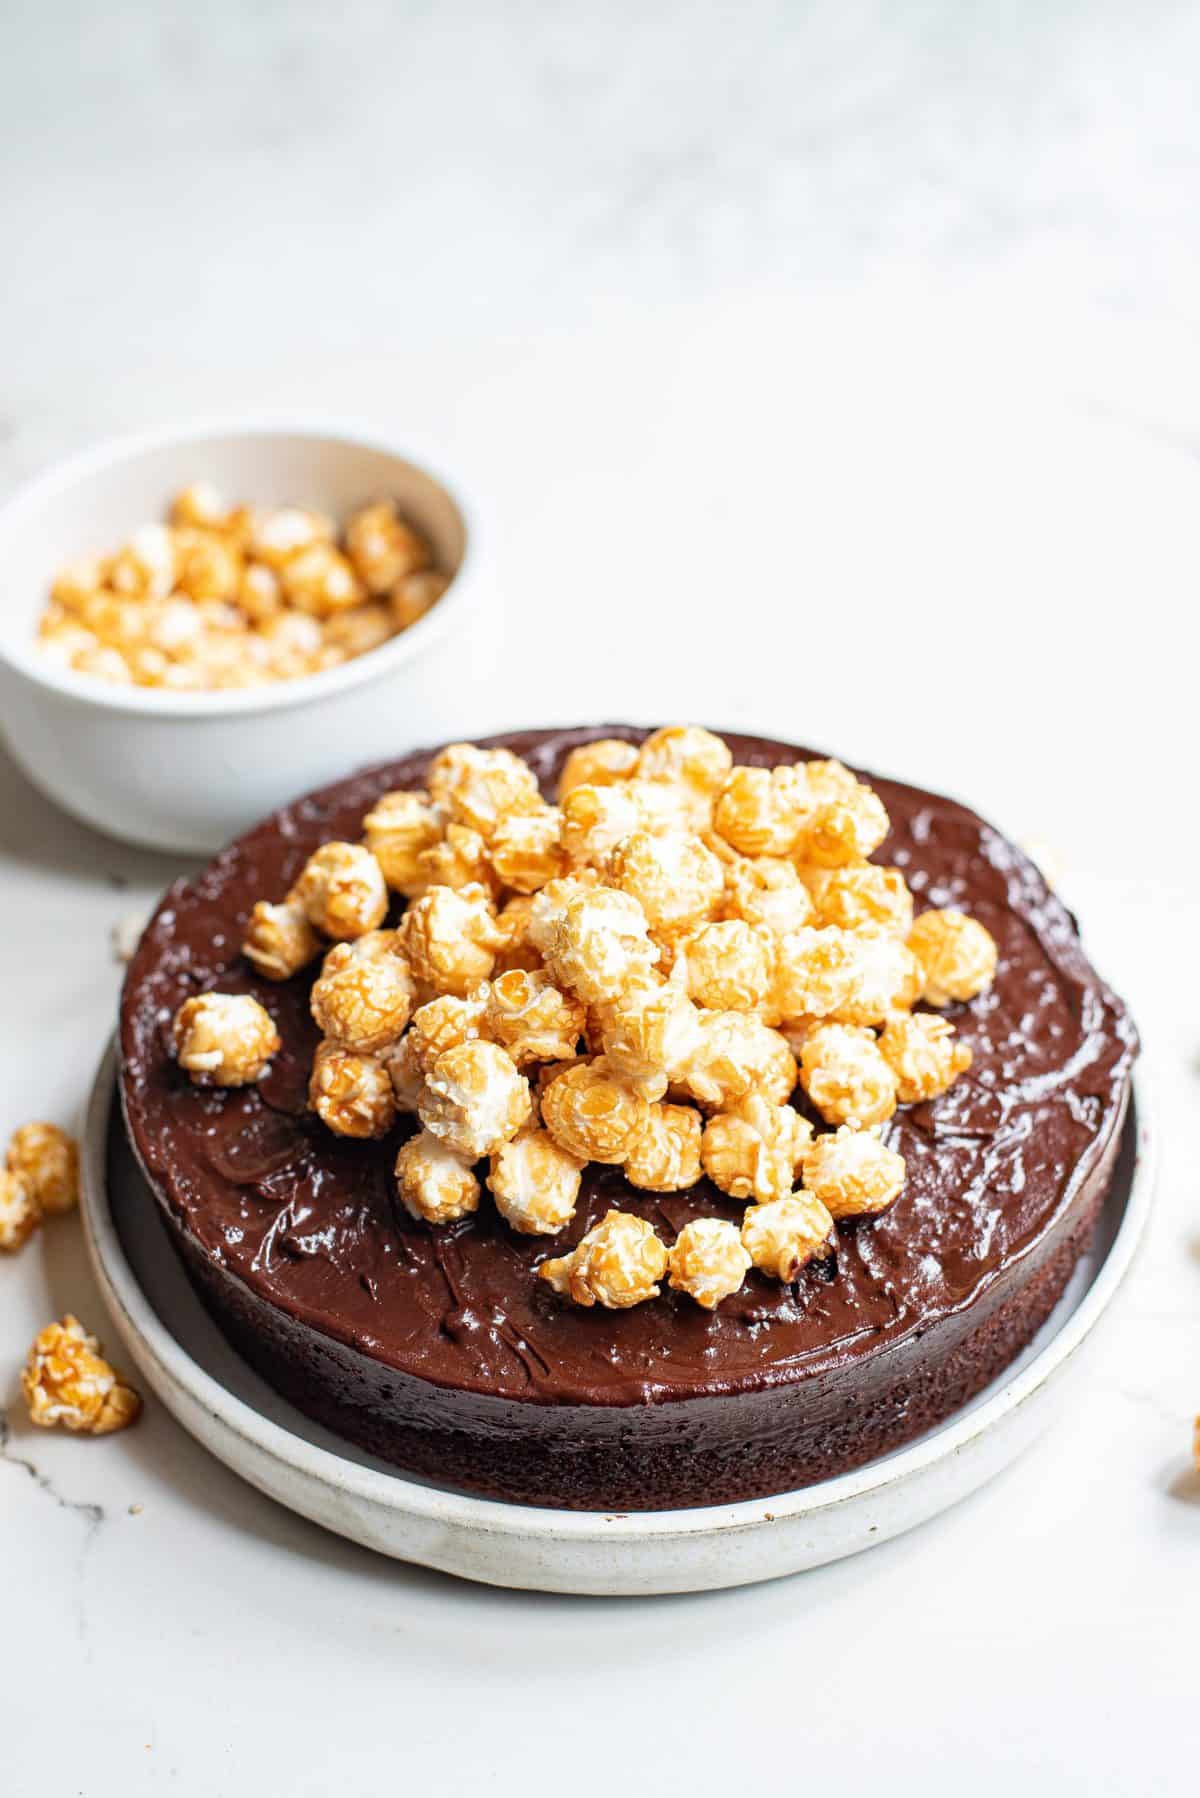 placing the caramel corn on frosted chocolate cake